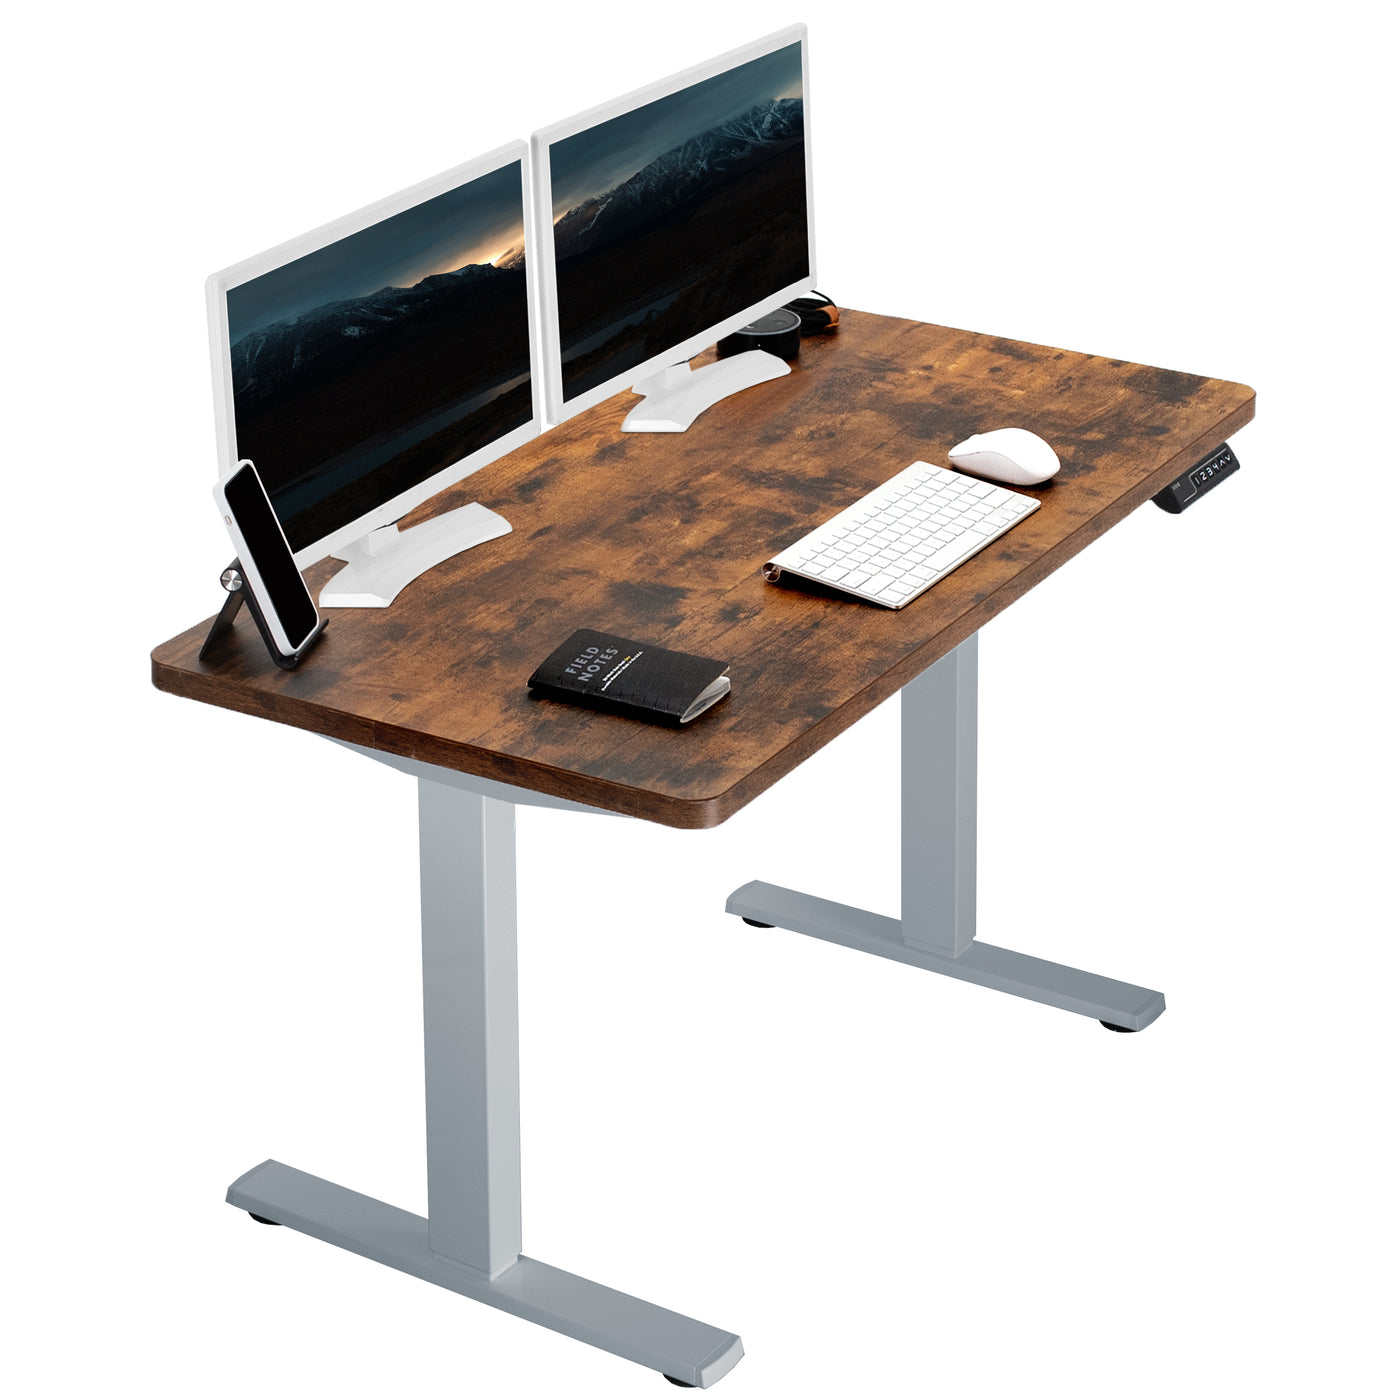 Rustic sturdy ergonomic sit or stand active desk workstation with adjustable height using smart control panel.